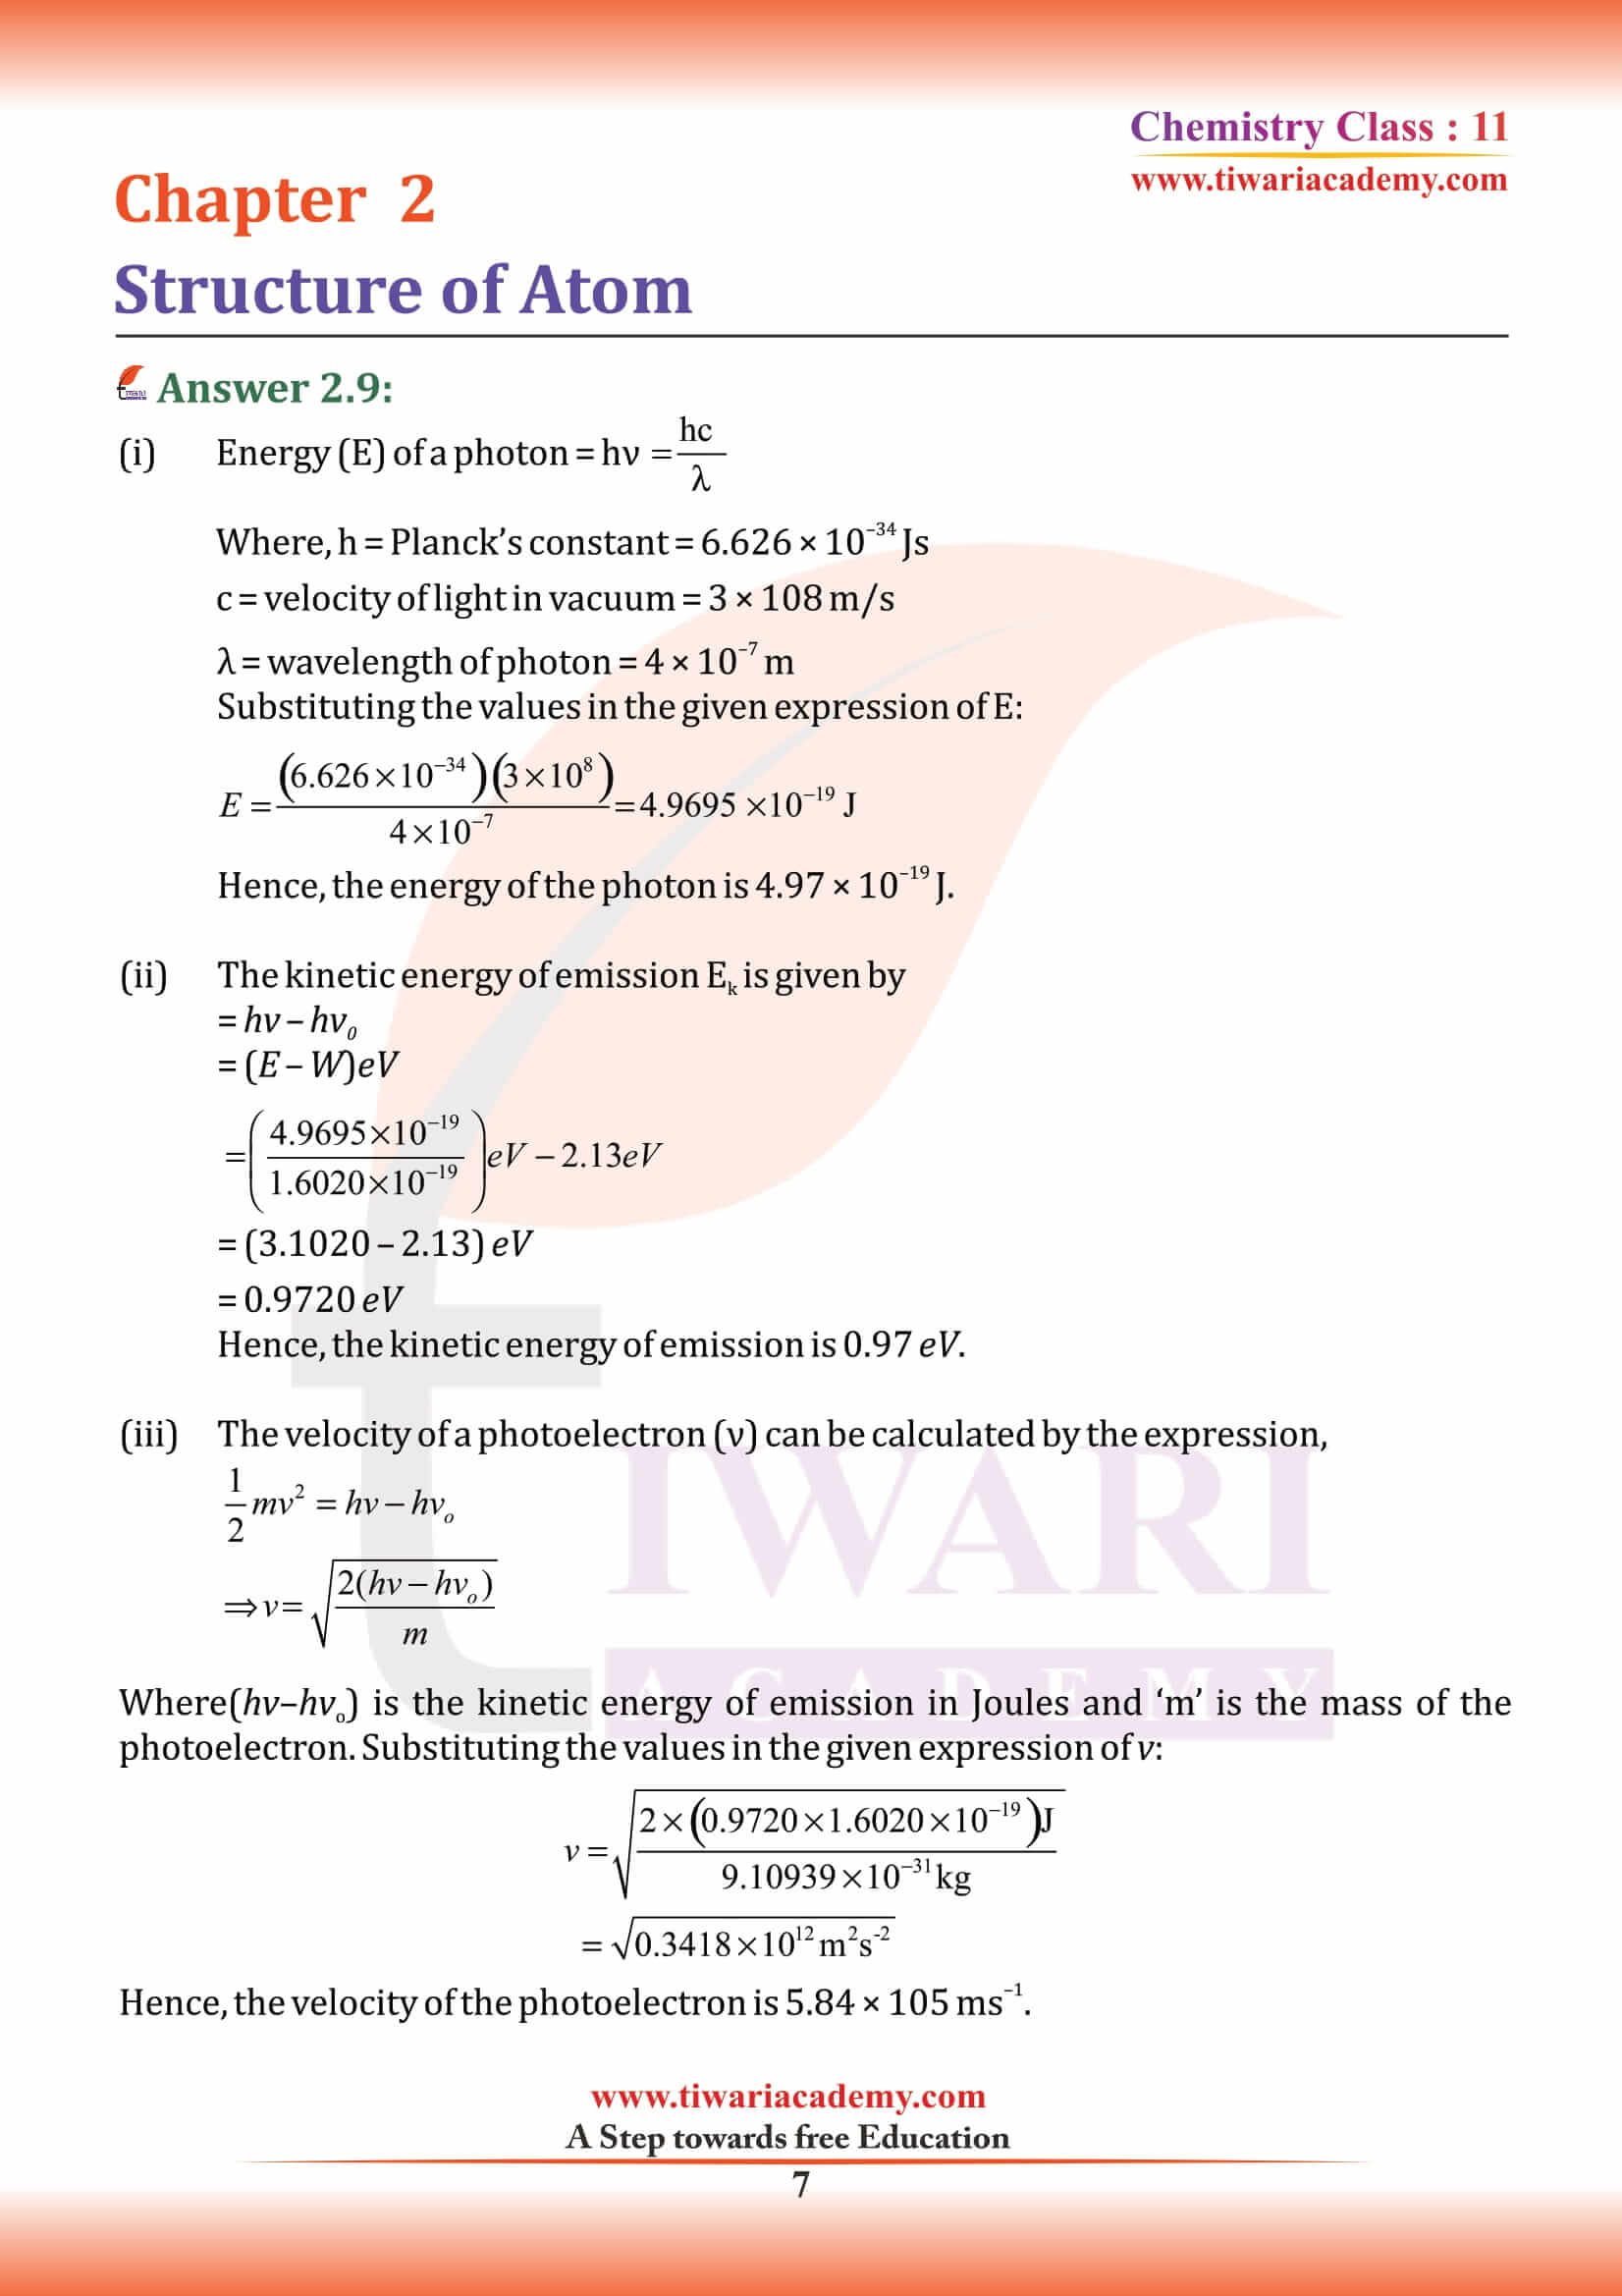 NCERT Solutions for Class 11 Chemistry Chapter 2 question 6 7 8 9 10